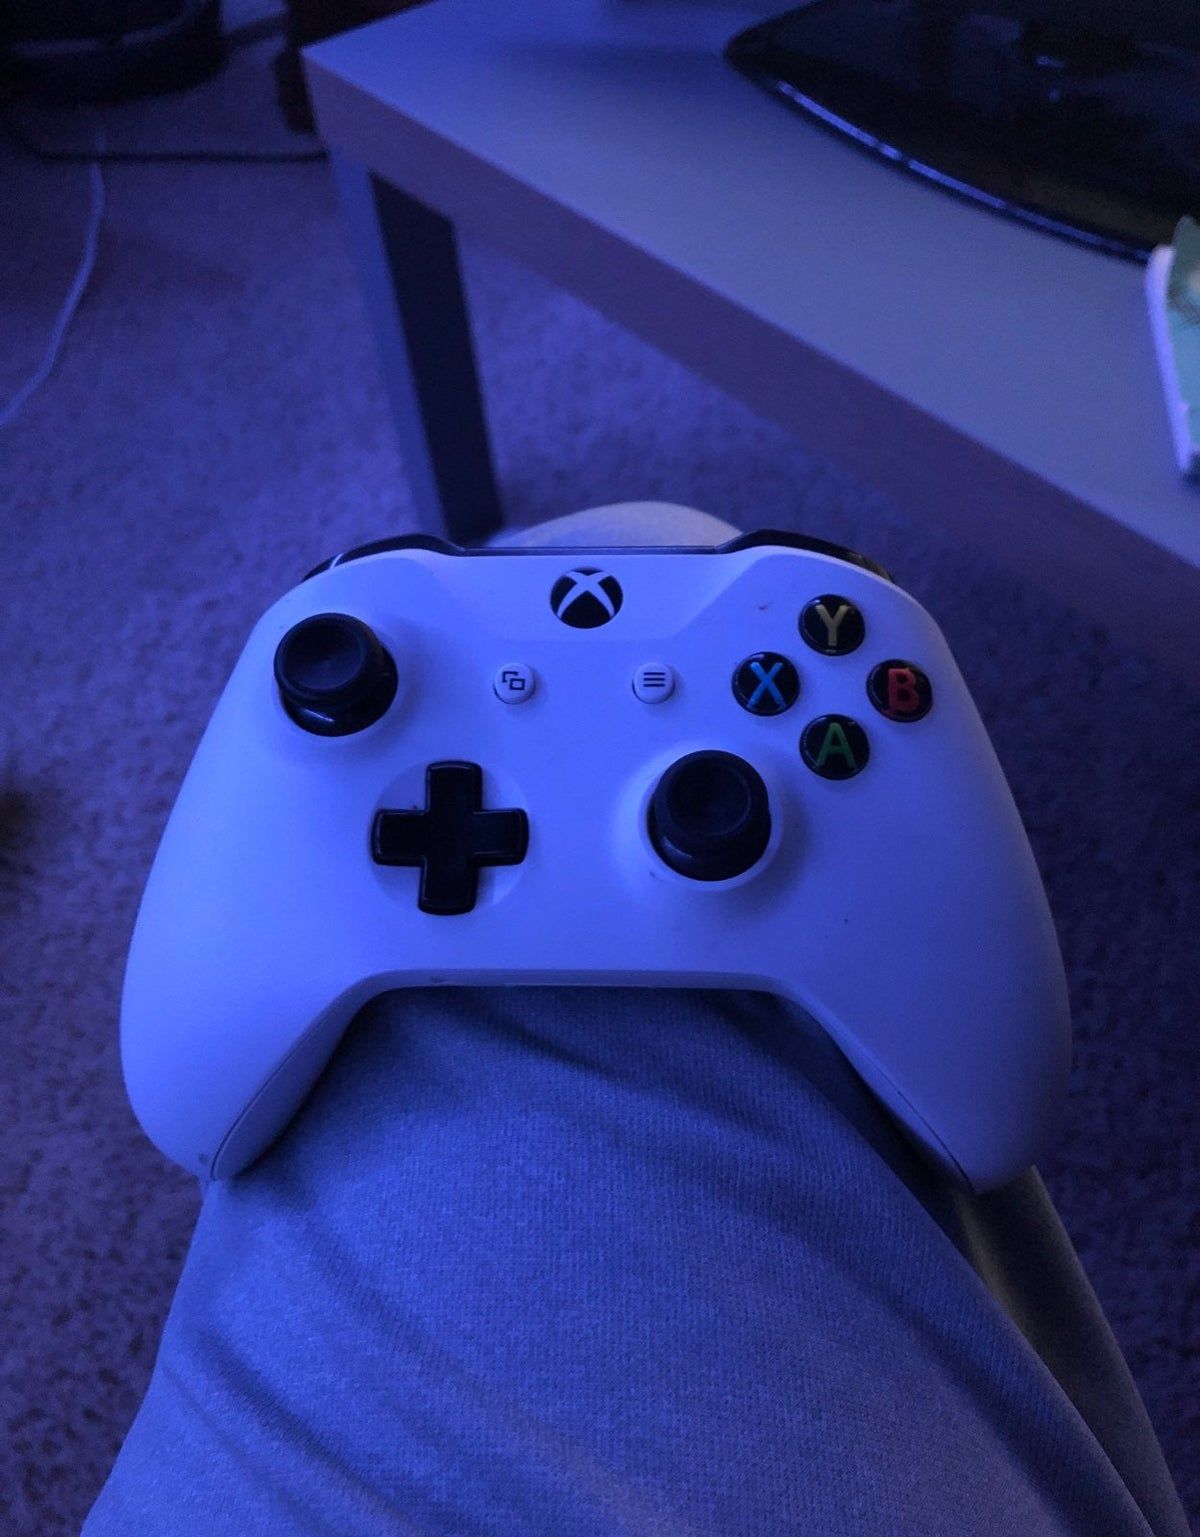 Xbox one controller. Game of thrones artwork, Xbox one controller, Black aesthetic wallpaper